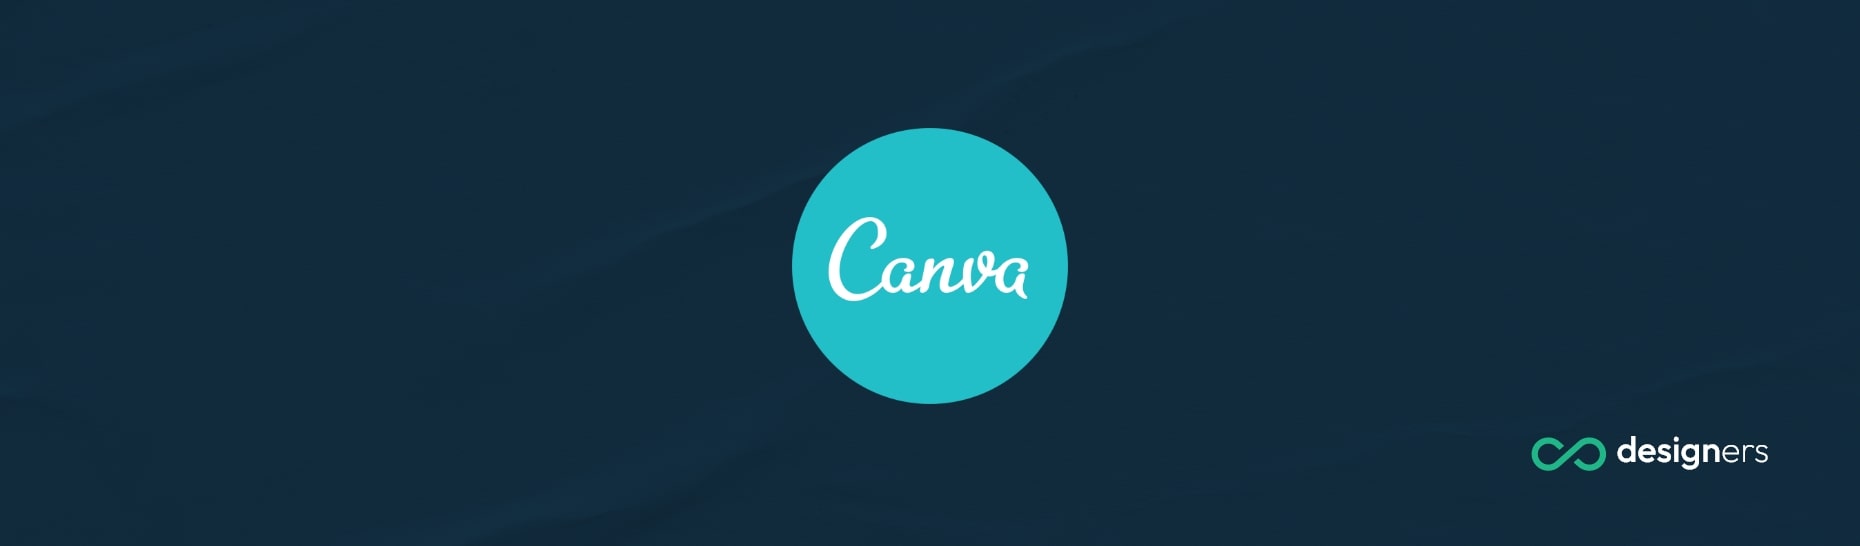 How Do I Embed a Video in Canva? 